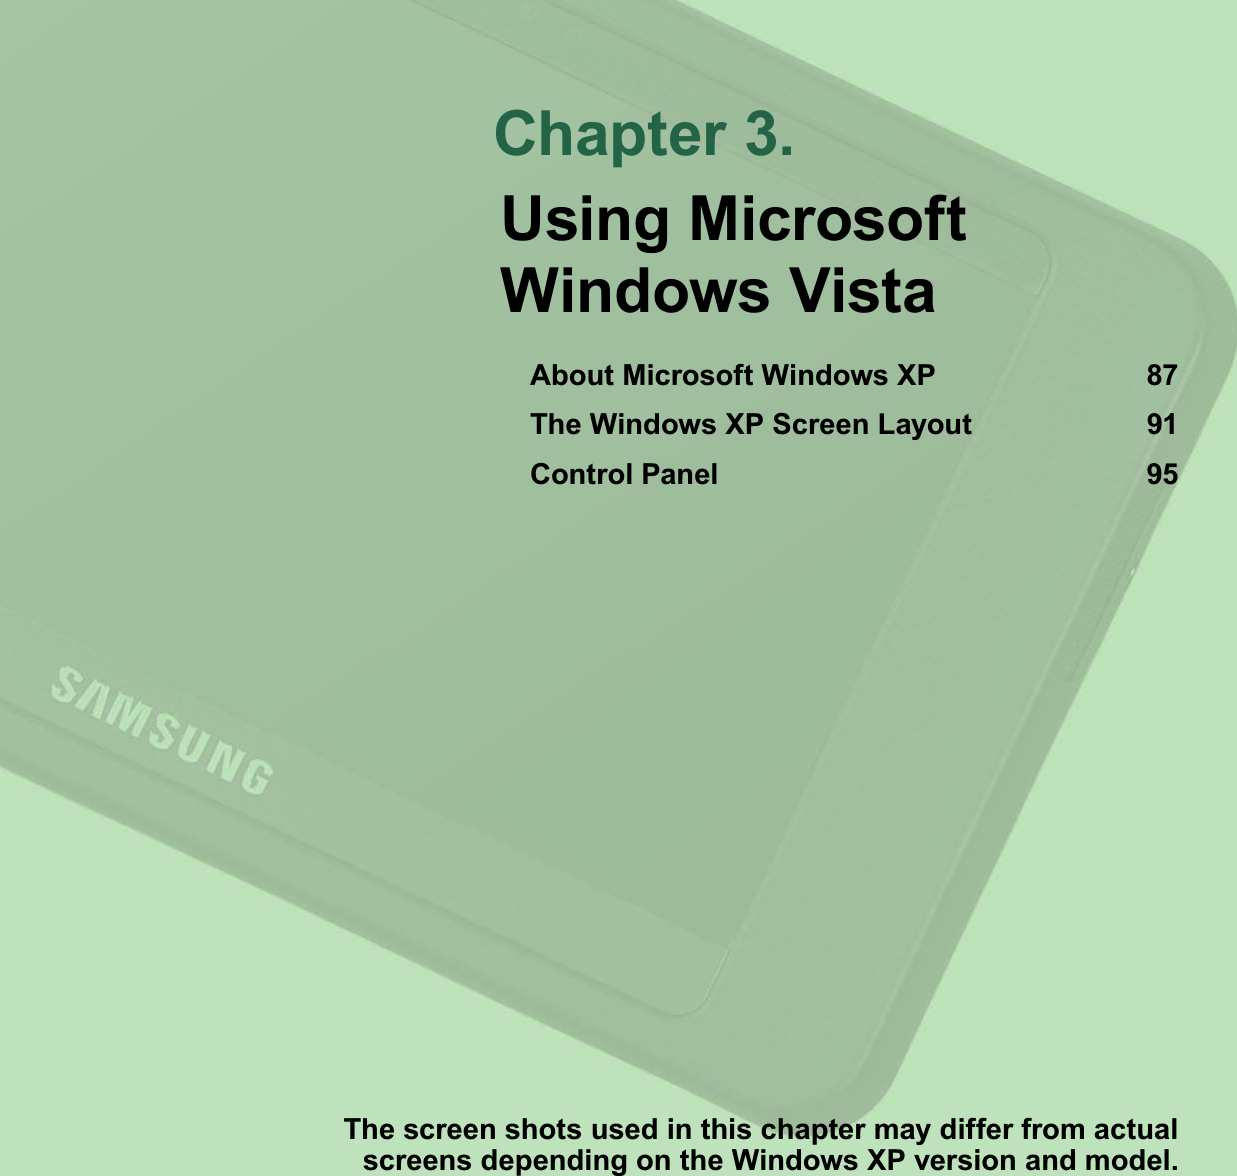 Chapter 3.The screen shots used in this chapter may differ from actual screens depending on the Windows XP version and model.Using Microsoft Windows VistaAbout Microsoft Windows XP 87The Windows XP Screen Layout 91Control Panel 95